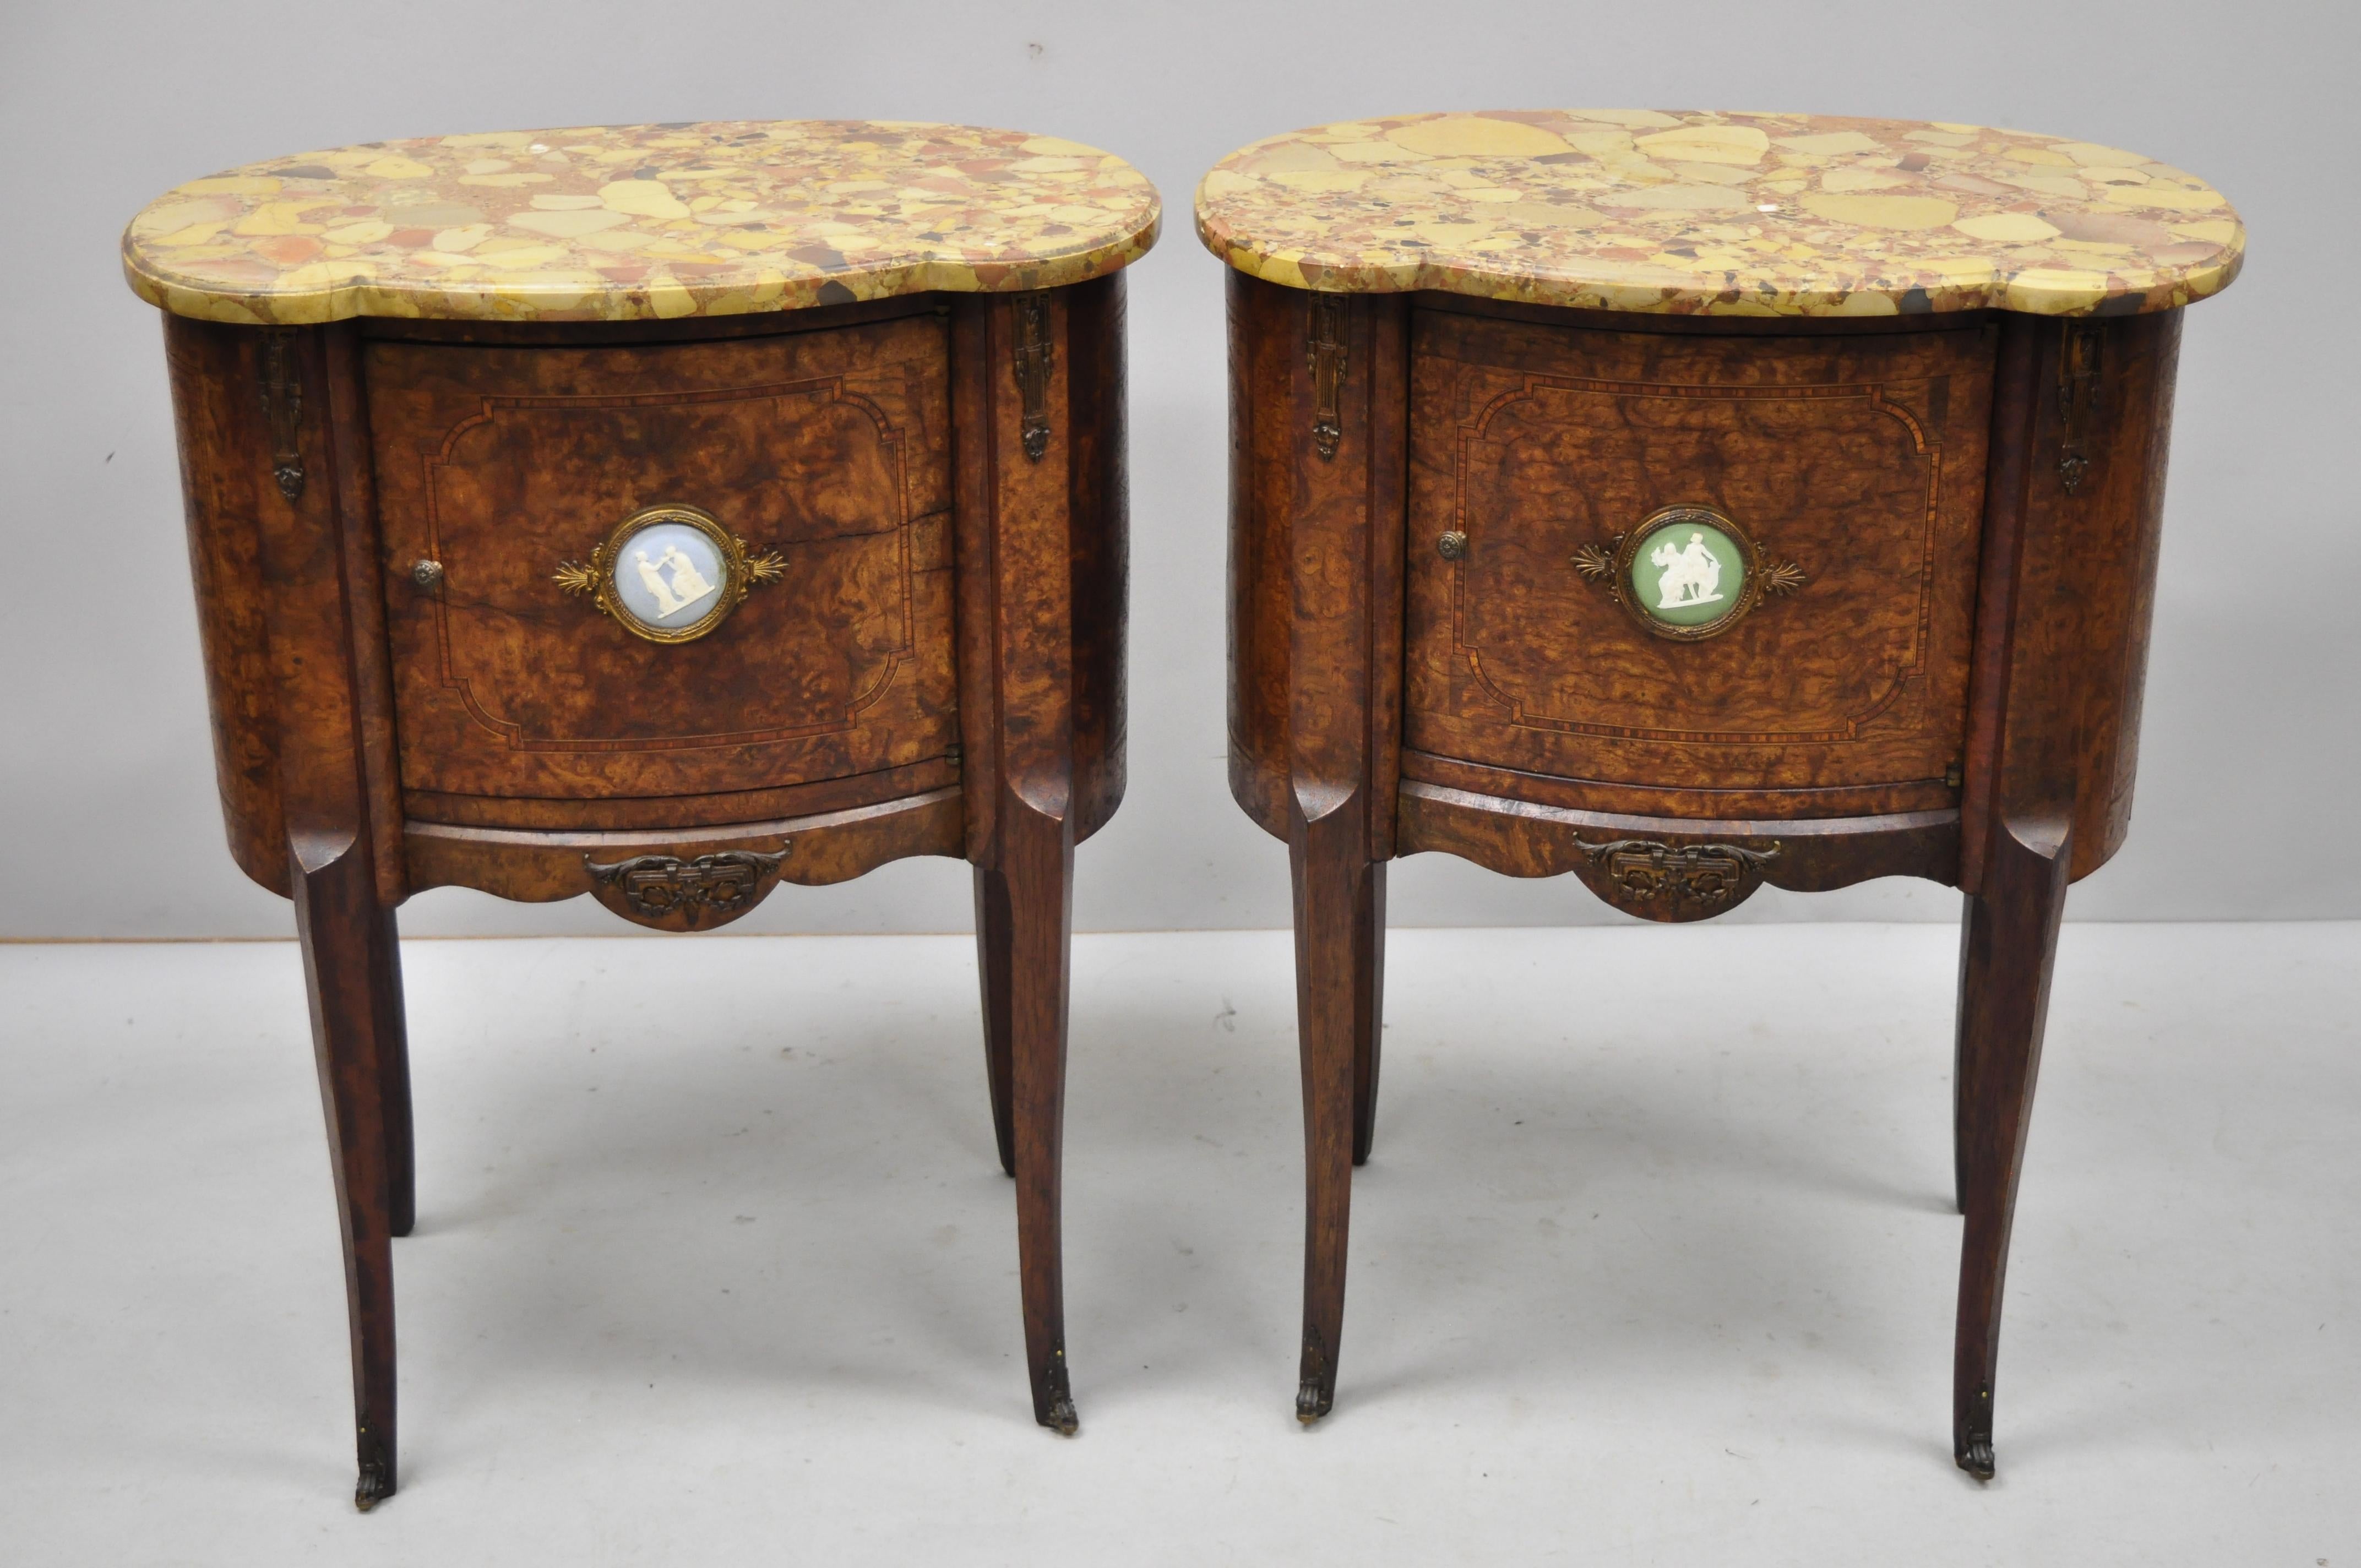 Pair of French Louis XV style rogue marble-top burl wood bombe nightstands. Listing includes shaped rogue marble tops, green and blue bisque porcelain medallions to door fronts, bronze ormolu, beautiful wood veneers, finished back, cabriole legs,